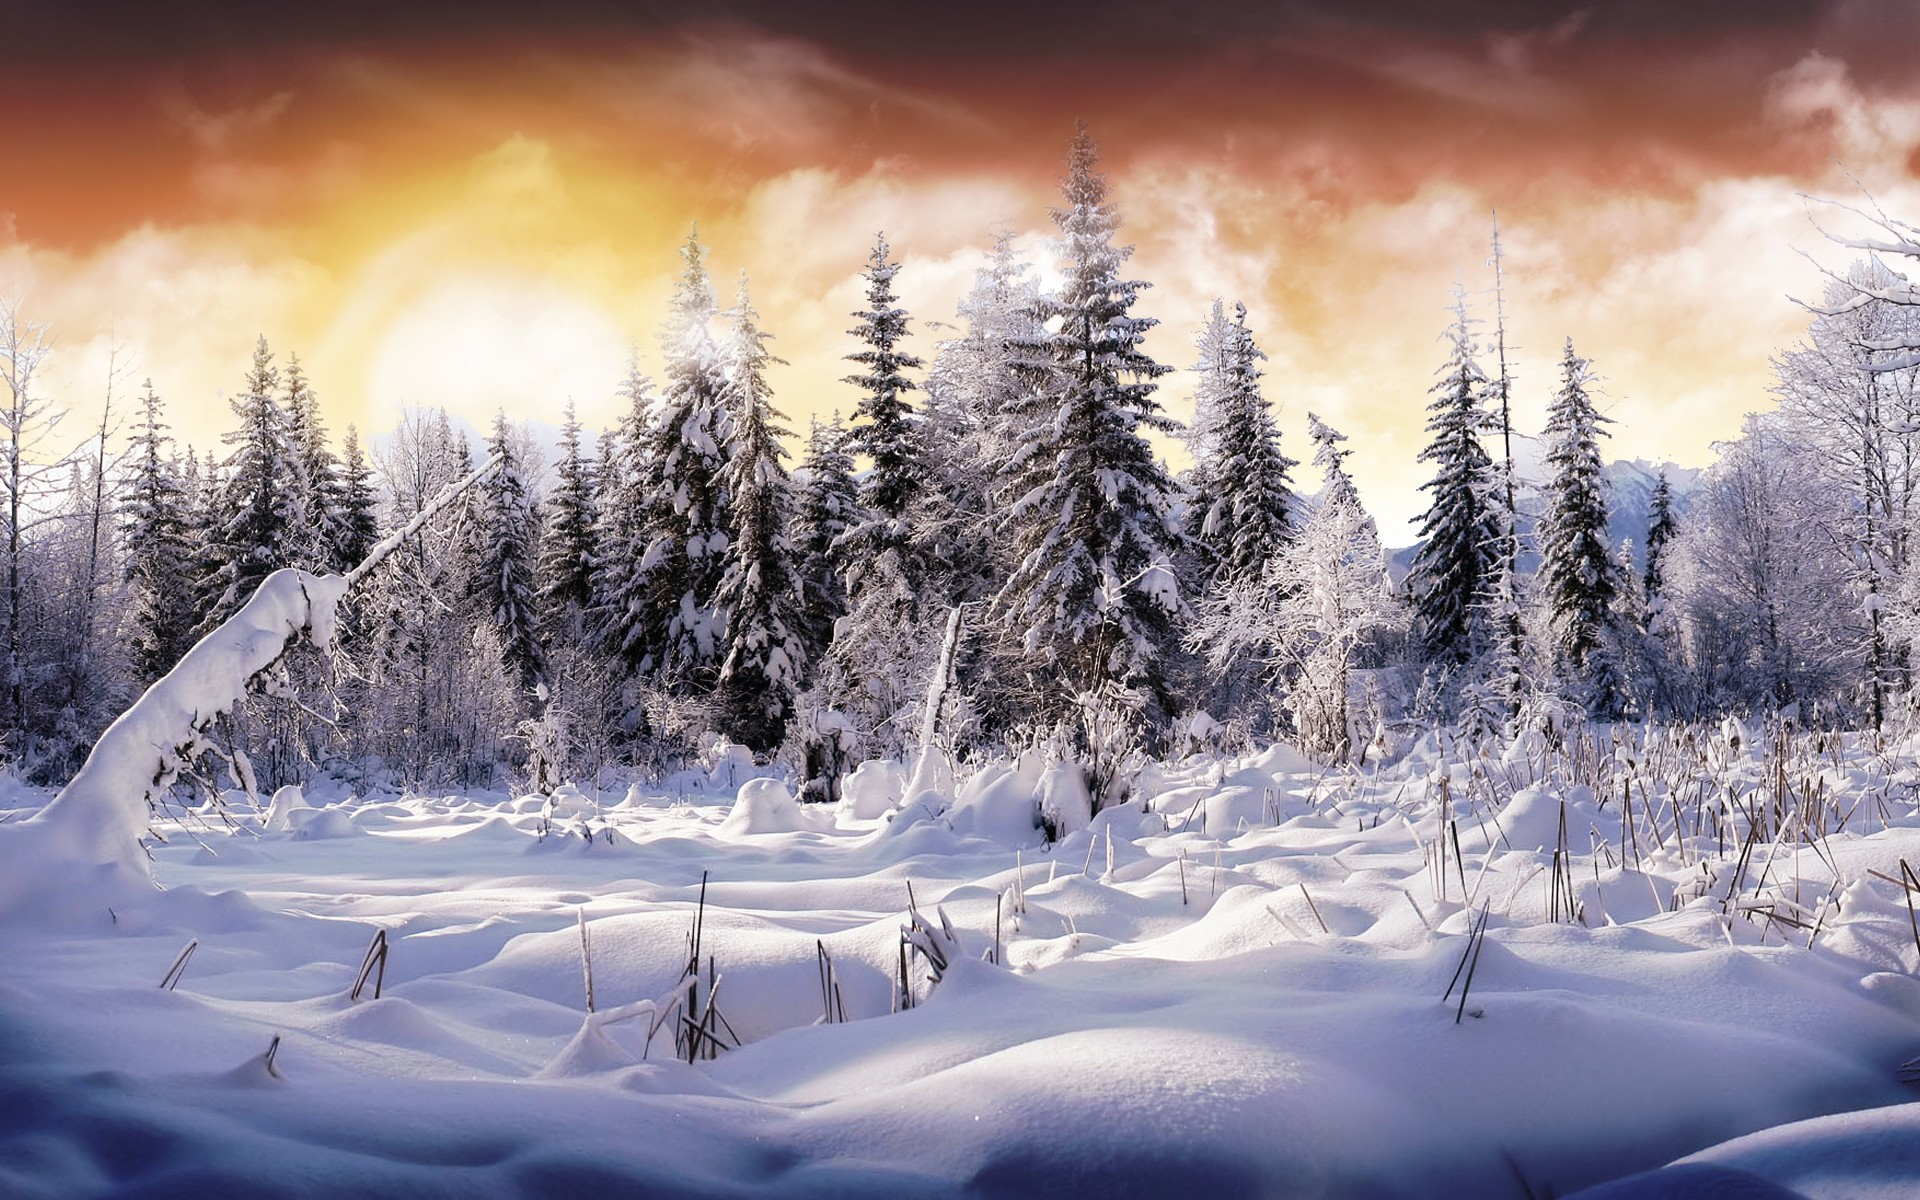 General 1920x1200 forest winter snow landscape photo manipulation cold ice trees digital art nature outdoors